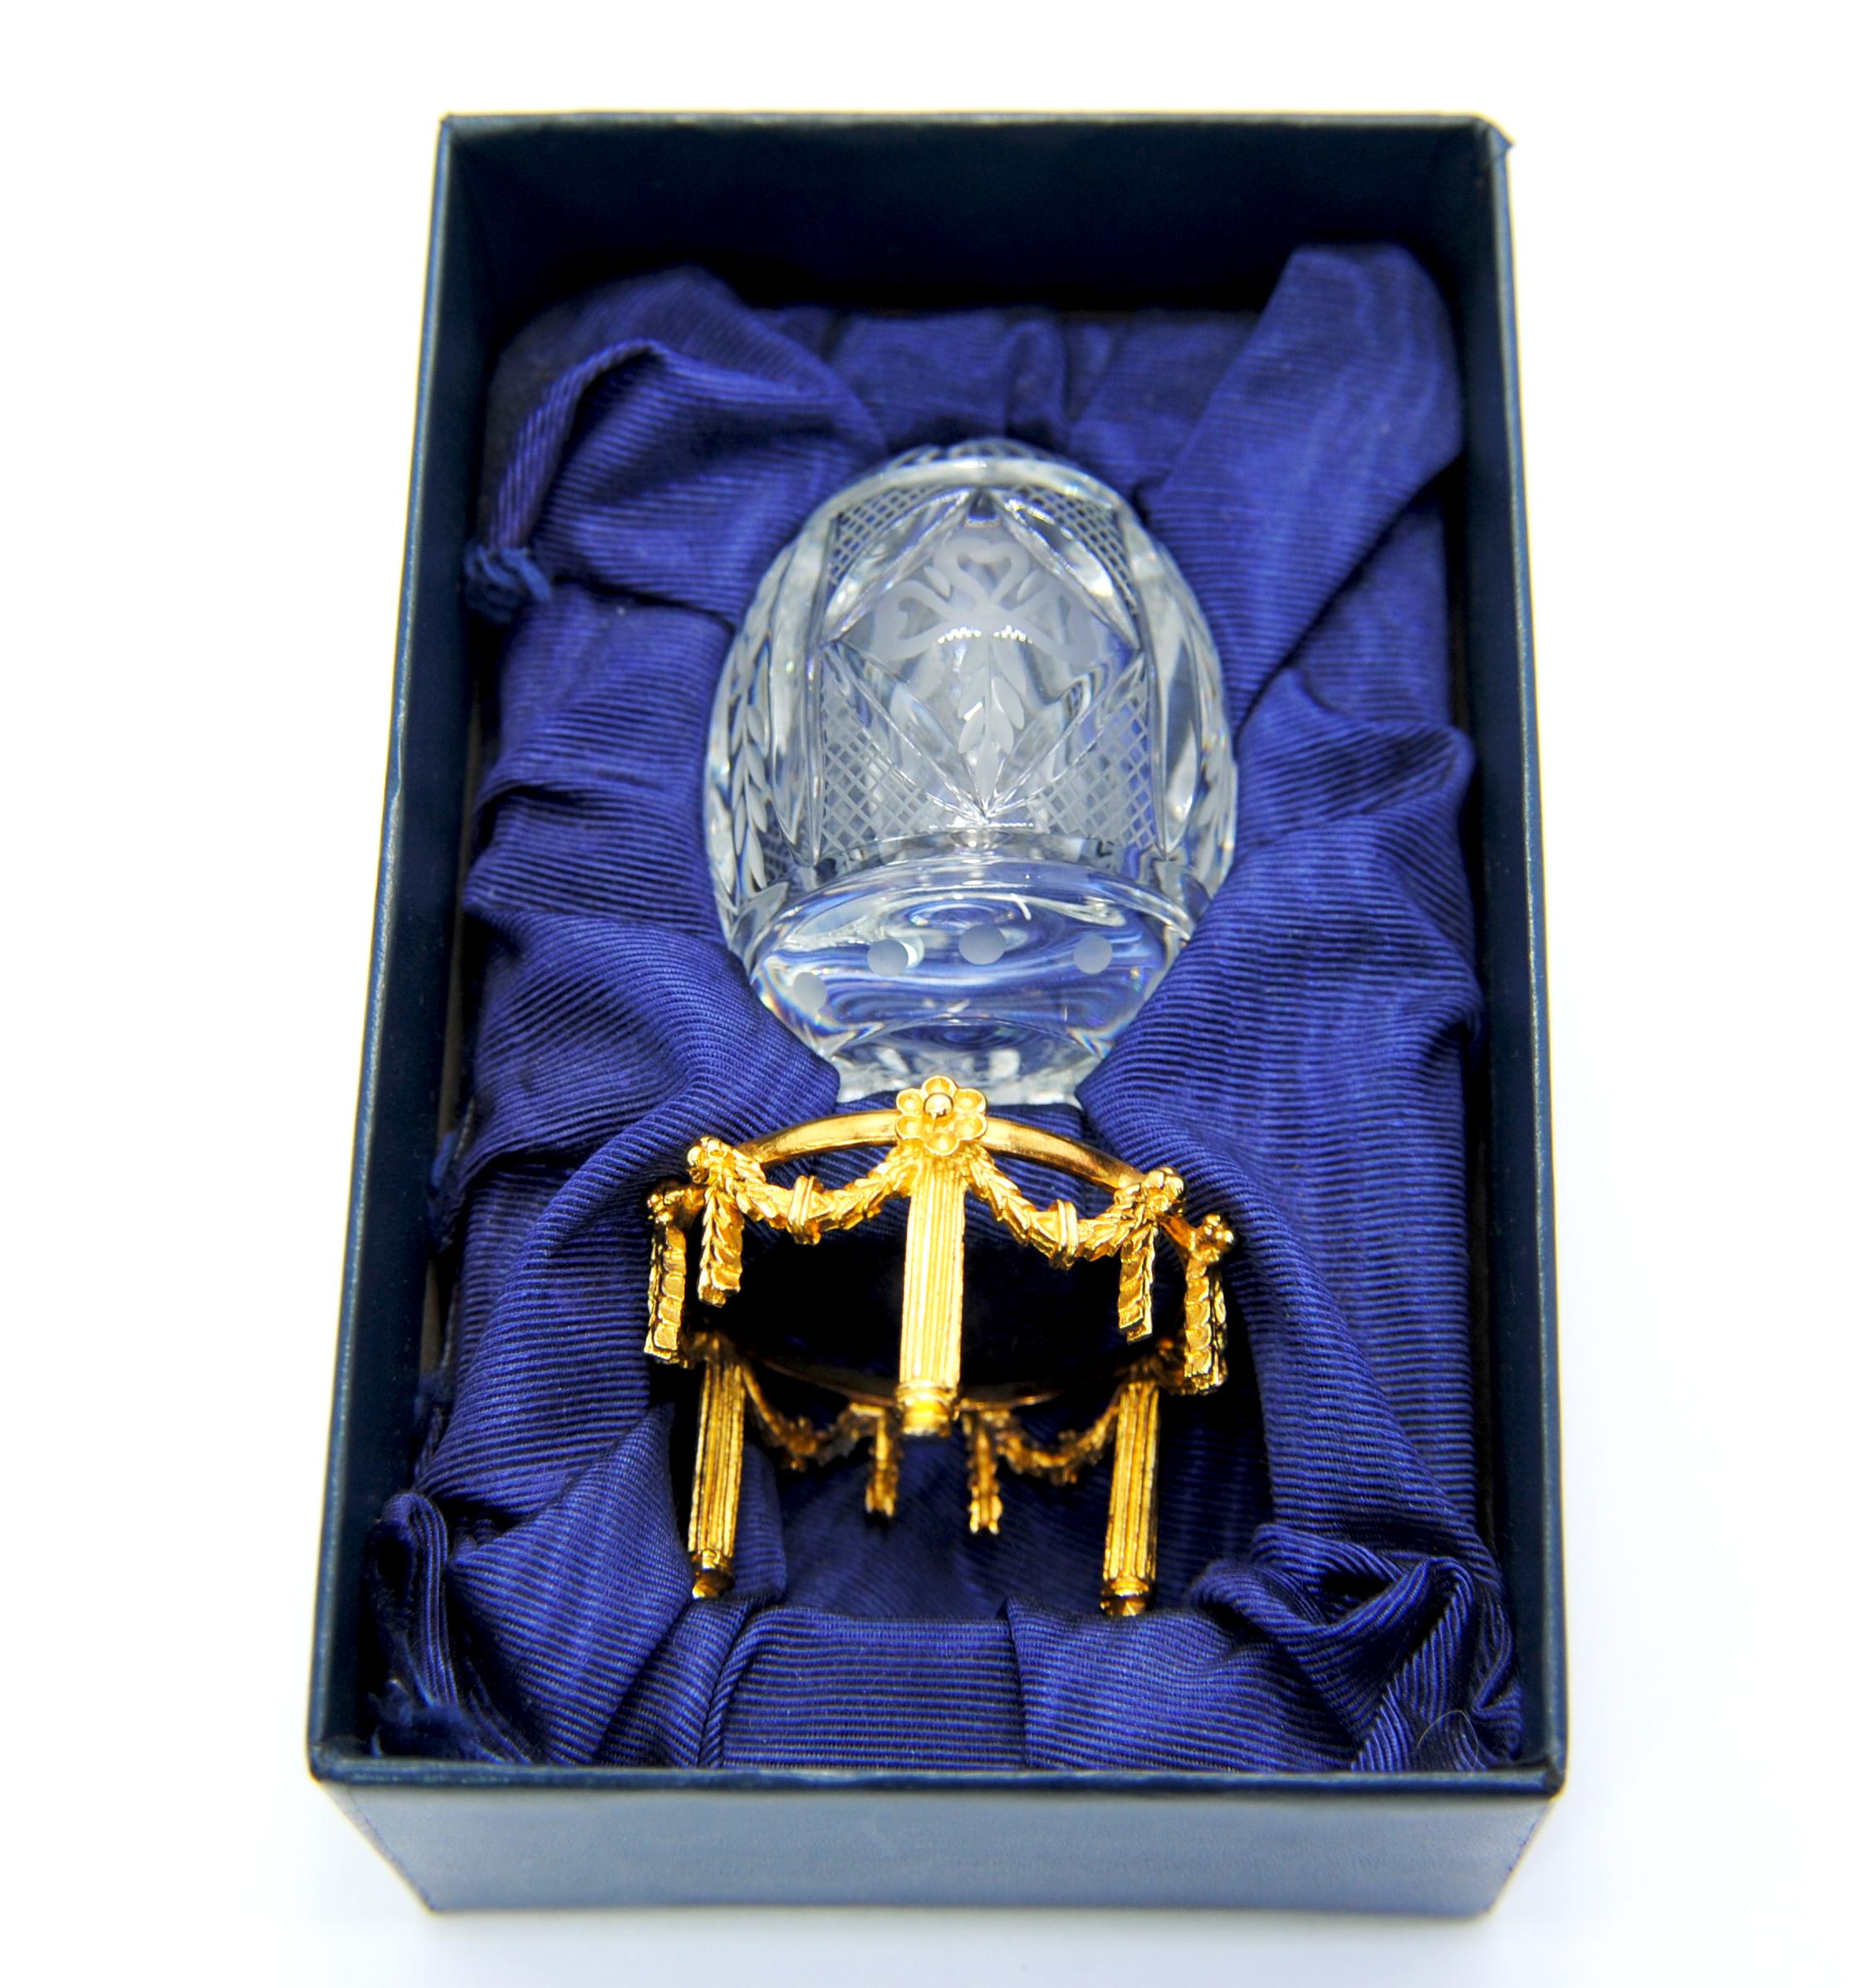 The Fabergé egg is the symbol of spiritual and physical rebirth and renewal.  
This crystal egg is signed and numbered  0475
Fabergé eggs are handcrafted in St. Petersburg.  Russia.
Introduced in 1995
The base is sterling silver gold plated.
size of